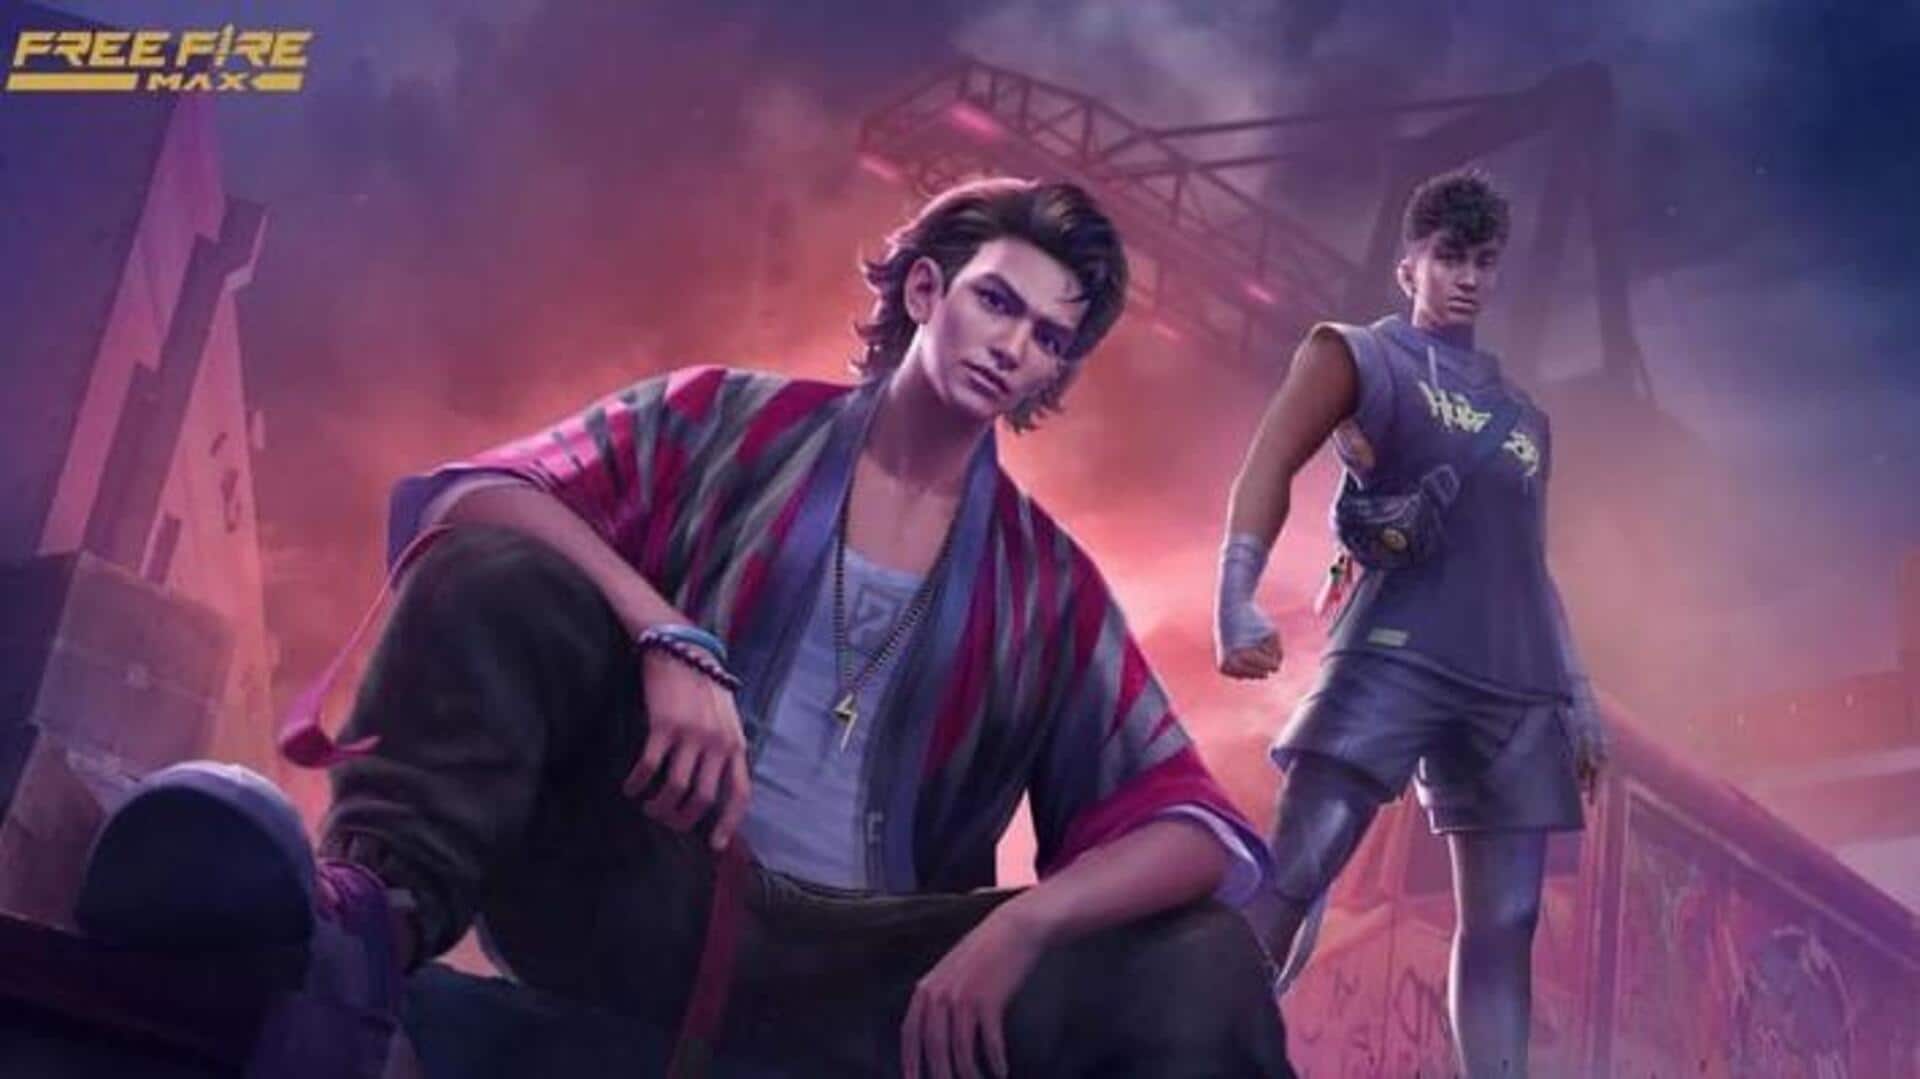 How to redeem Free Fire MAX codes for July 19